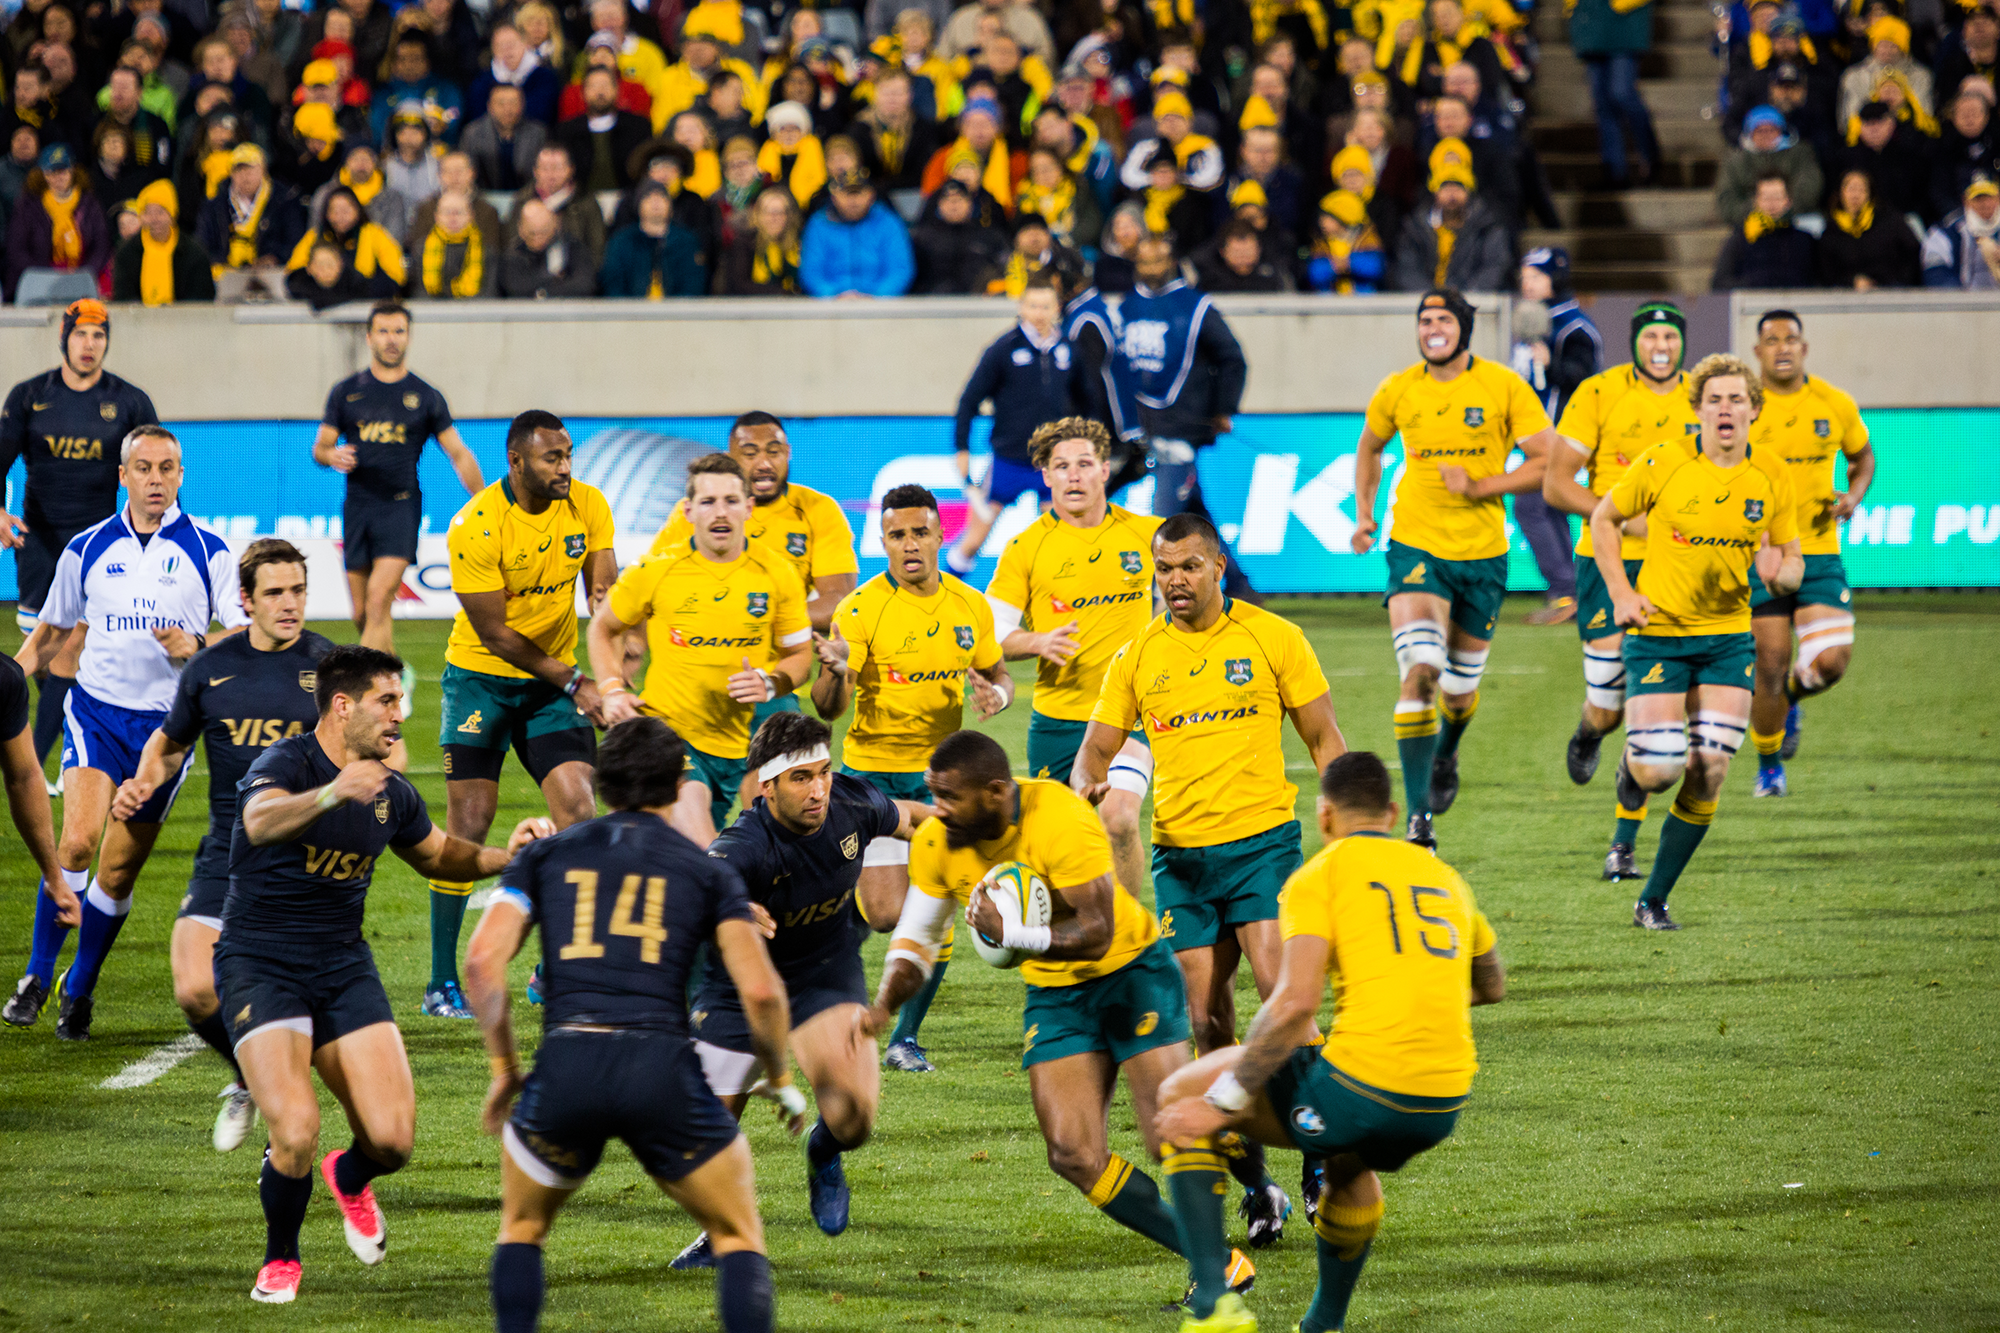 Wallabies reward Canberra faithful with win over the Pumas